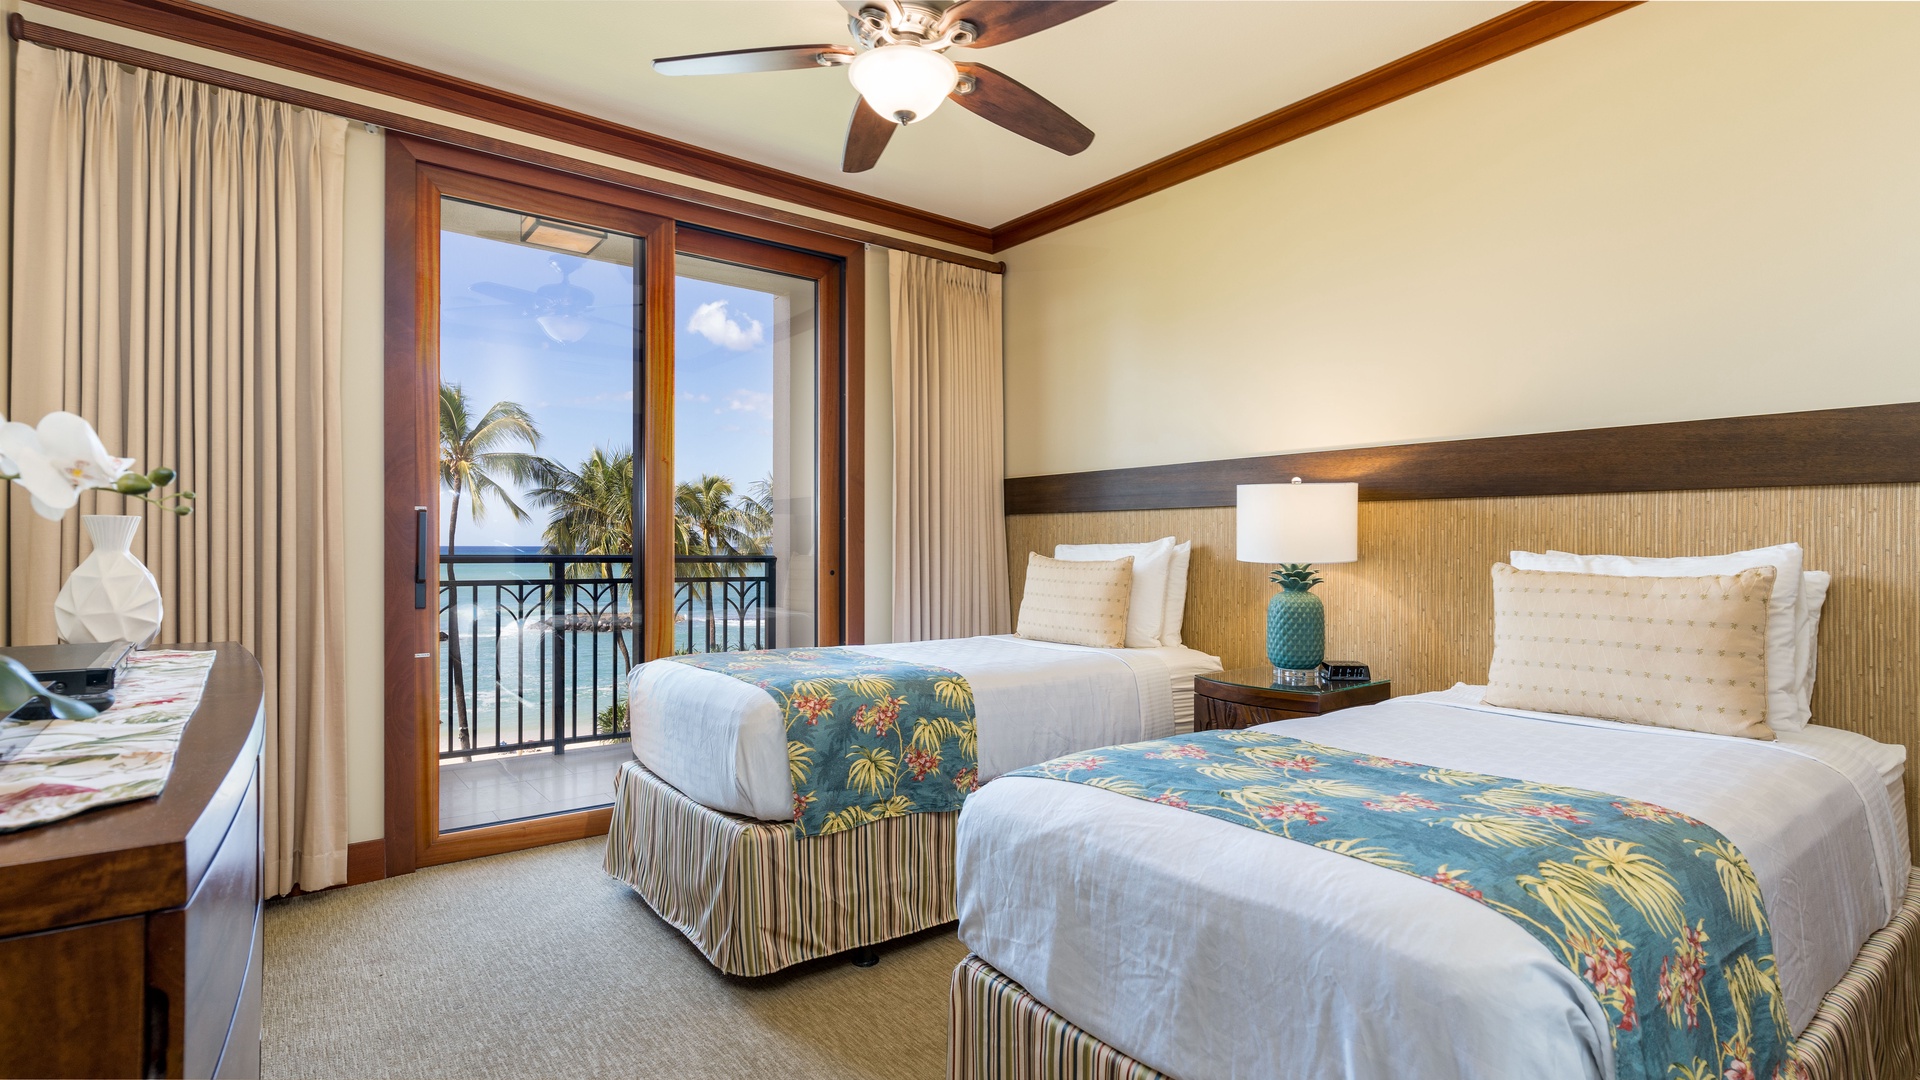 Kapolei Vacation Rentals, Ko Olina Beach Villas B309 - The second guest bedroom with twin beds and tropical views.